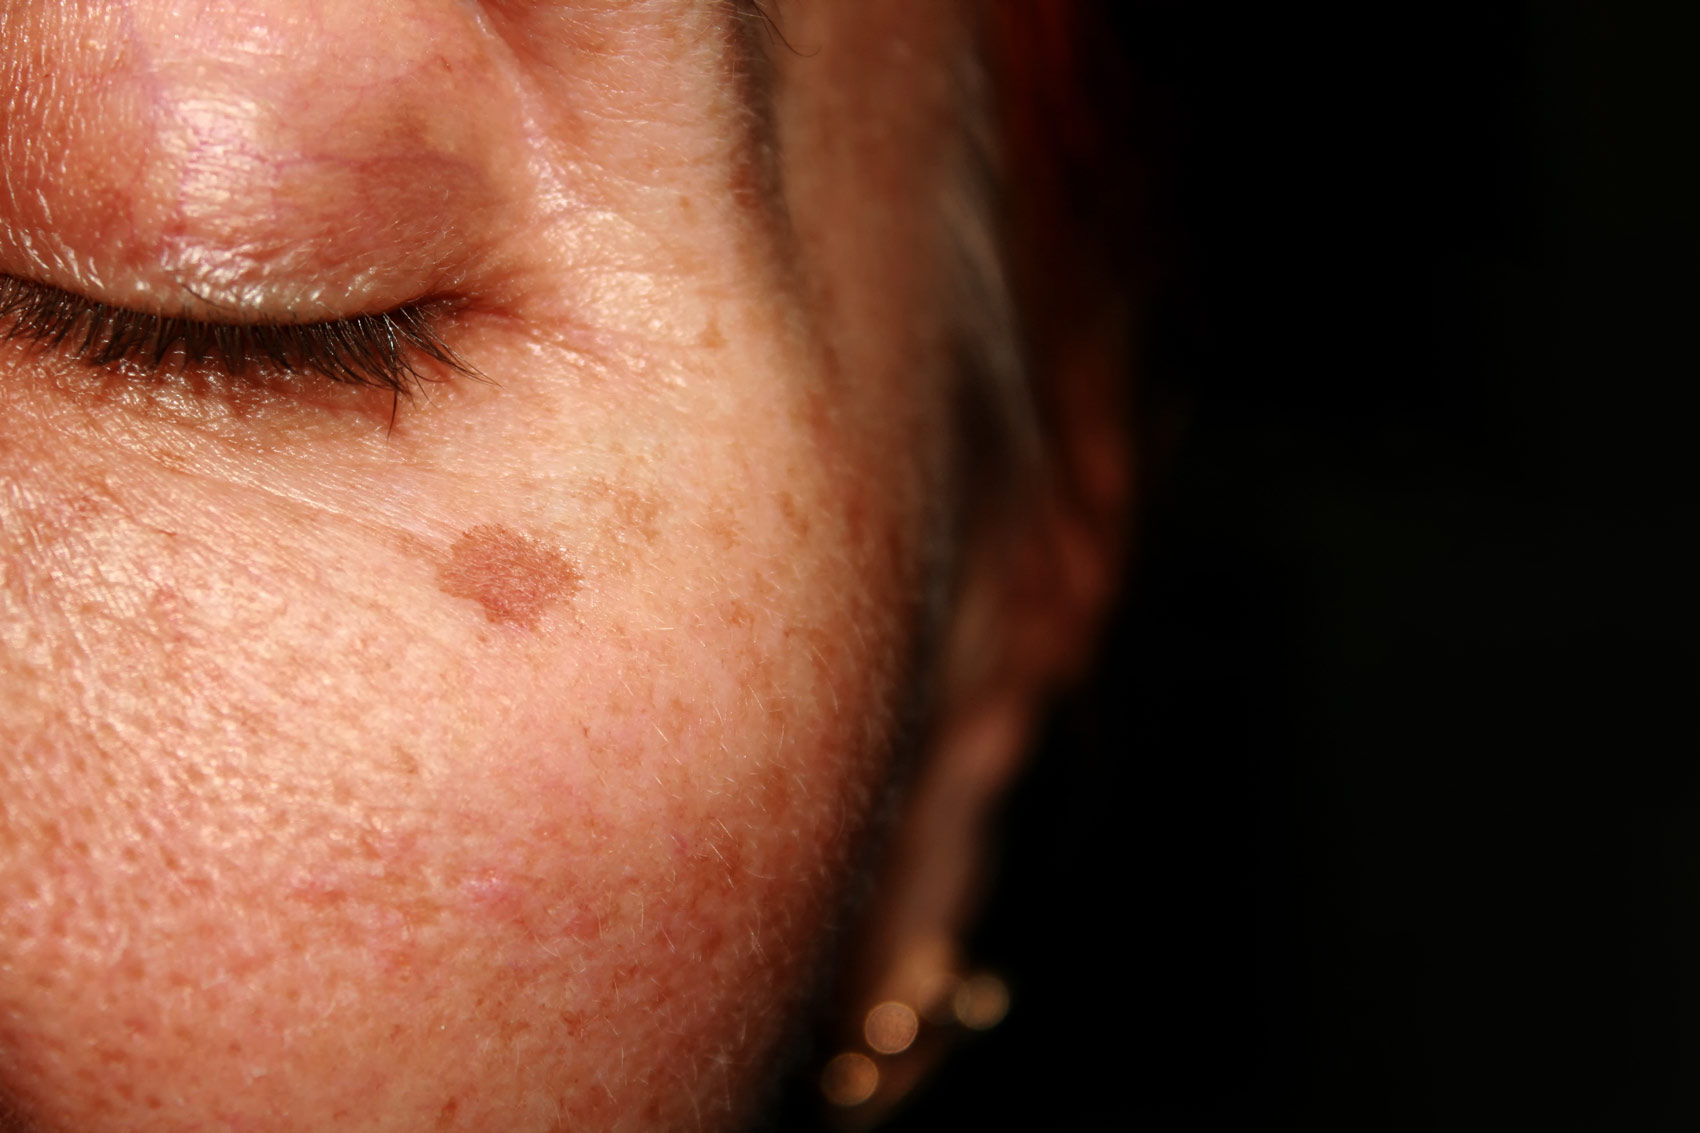 Skin tag on woman's face